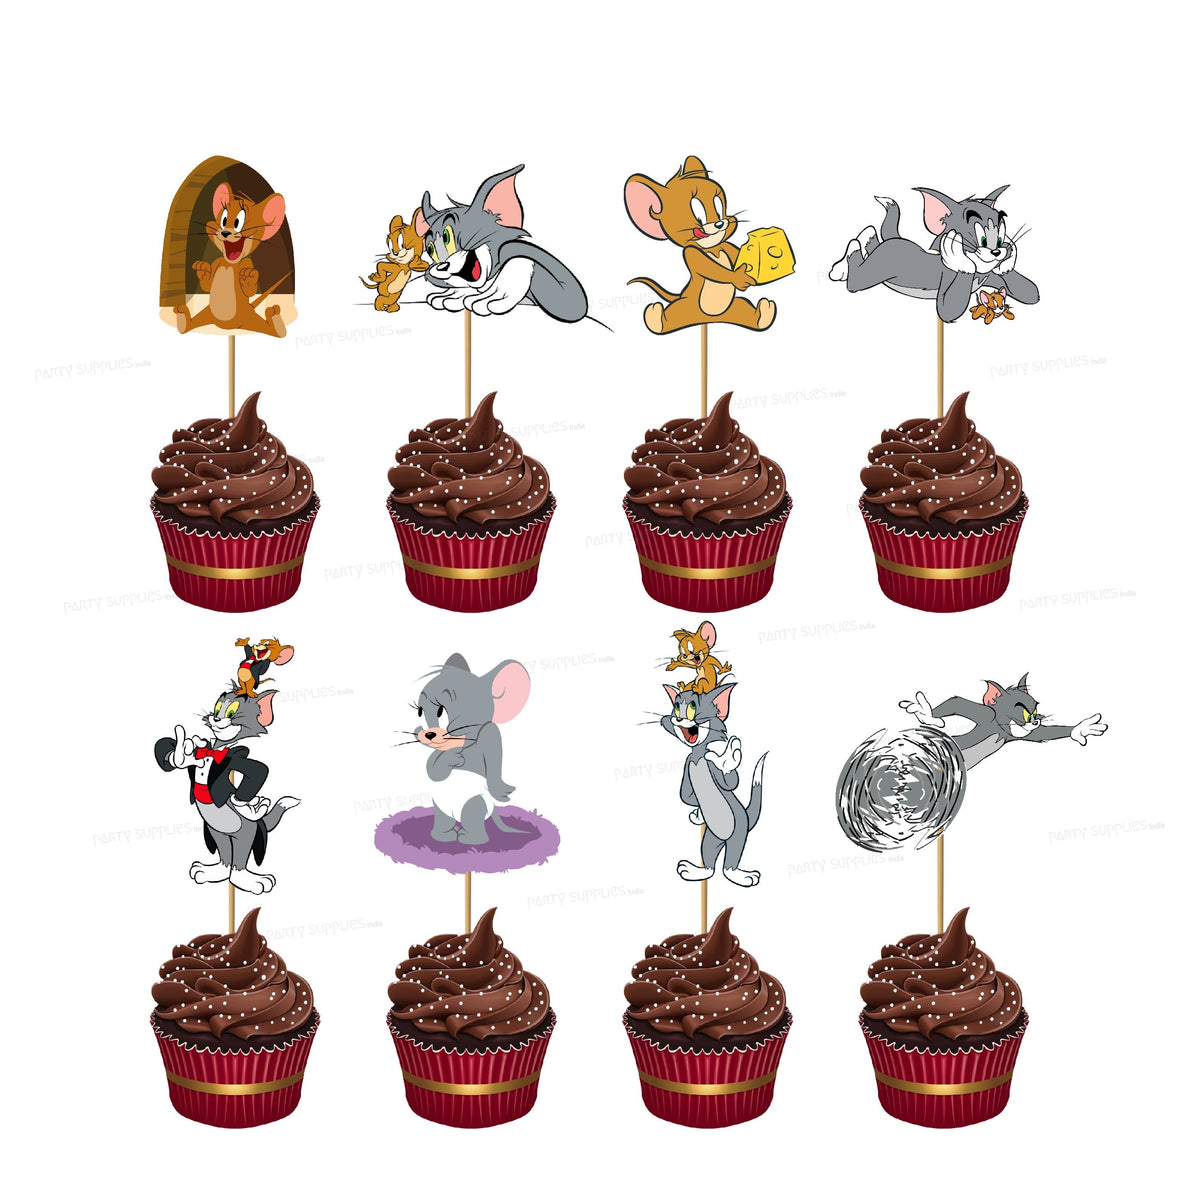 PSI Tom & Jerry Theme Cup Cake Topper